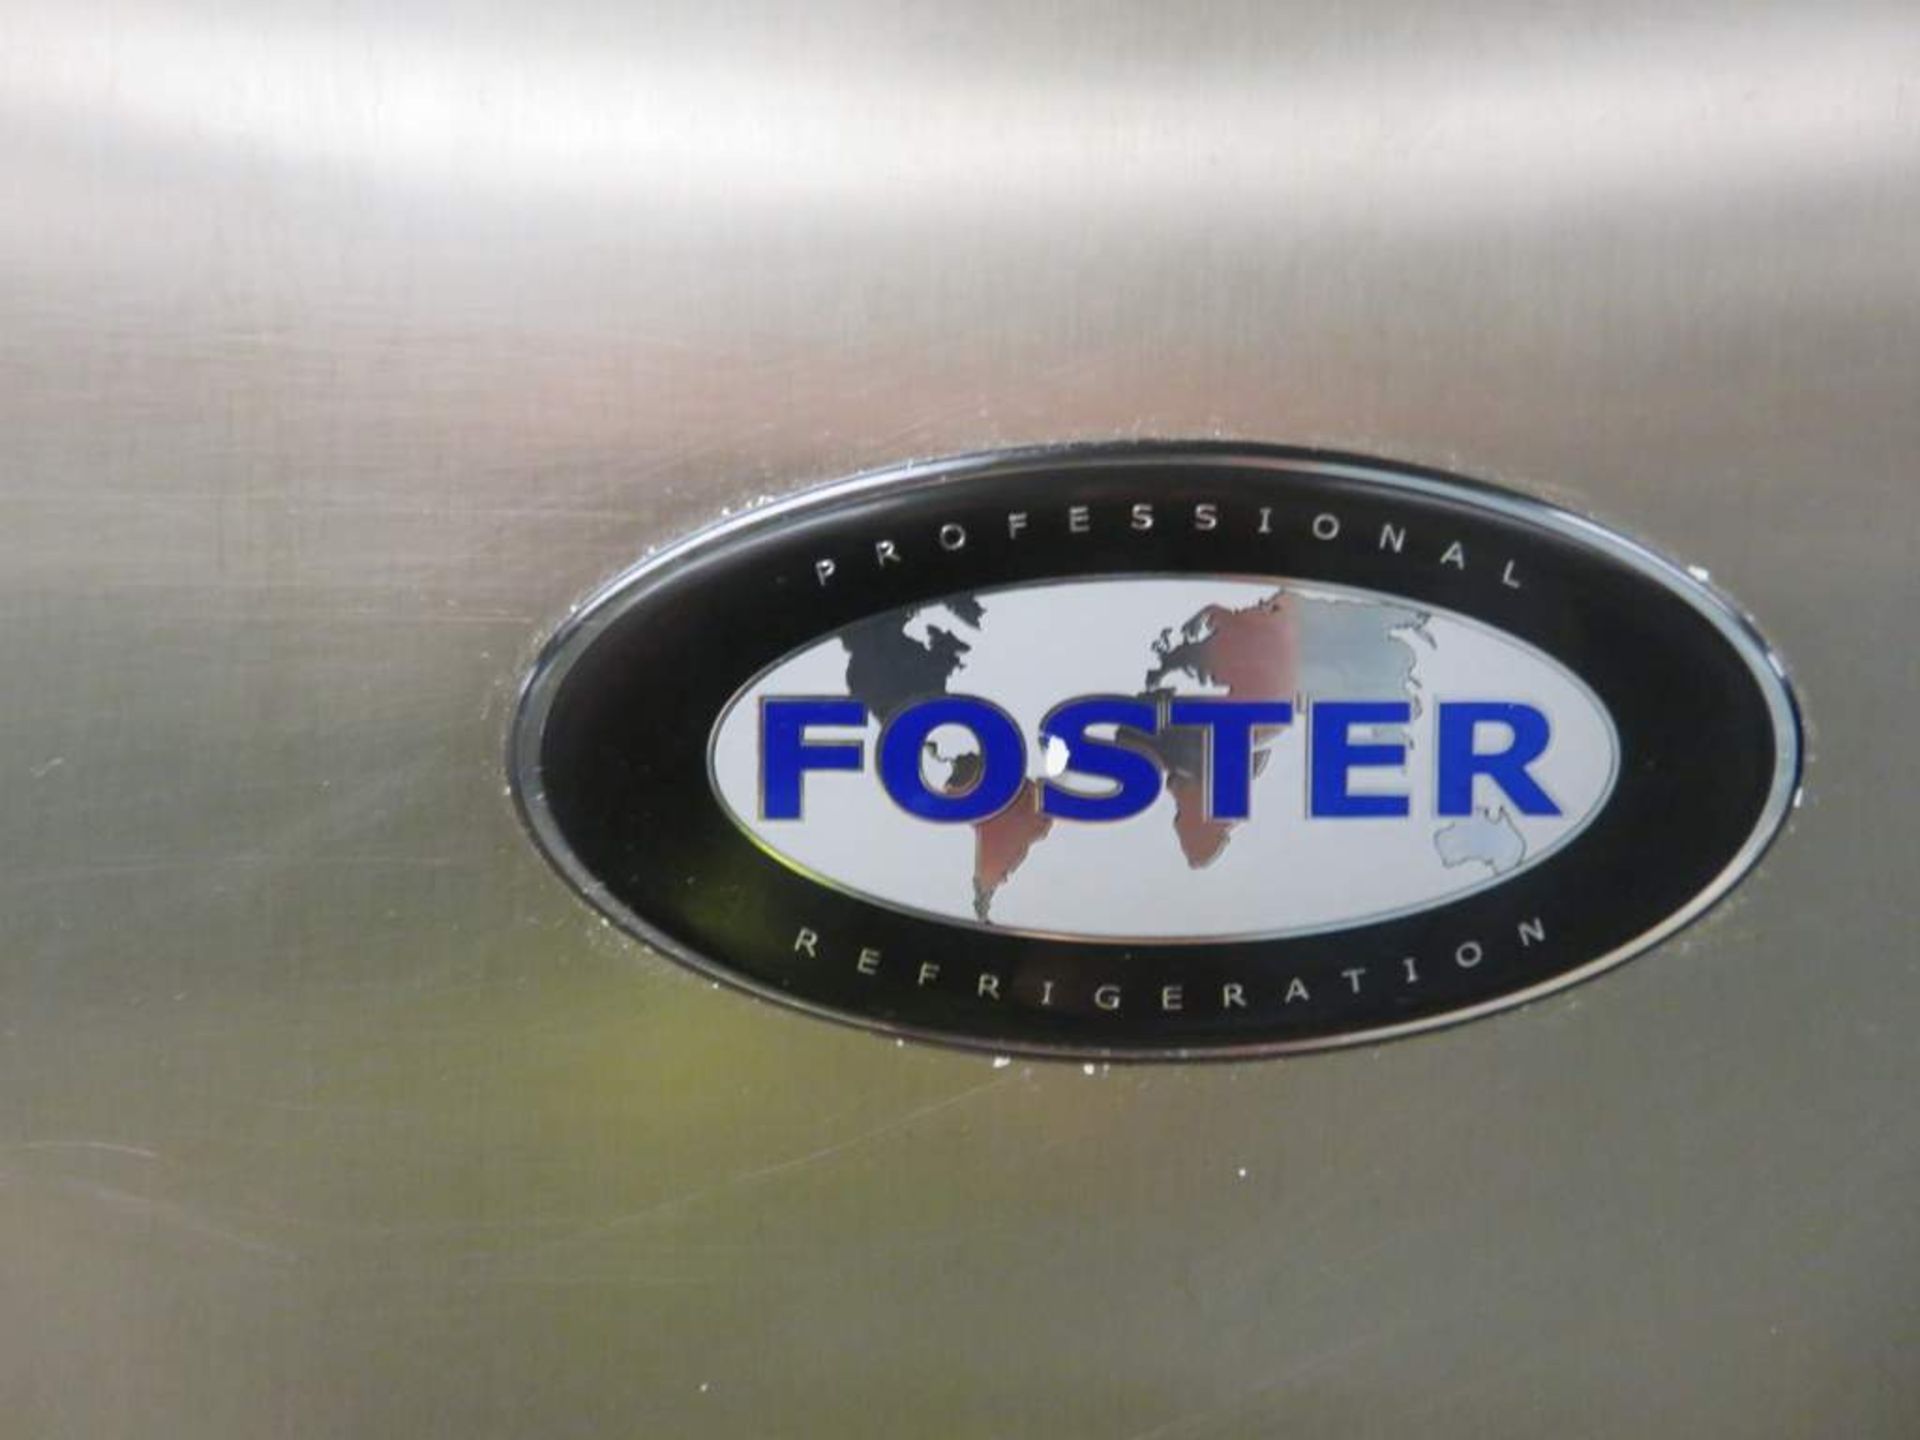 Foster PSG600LA stainless steel freezer - E5186336 - Image 6 of 6